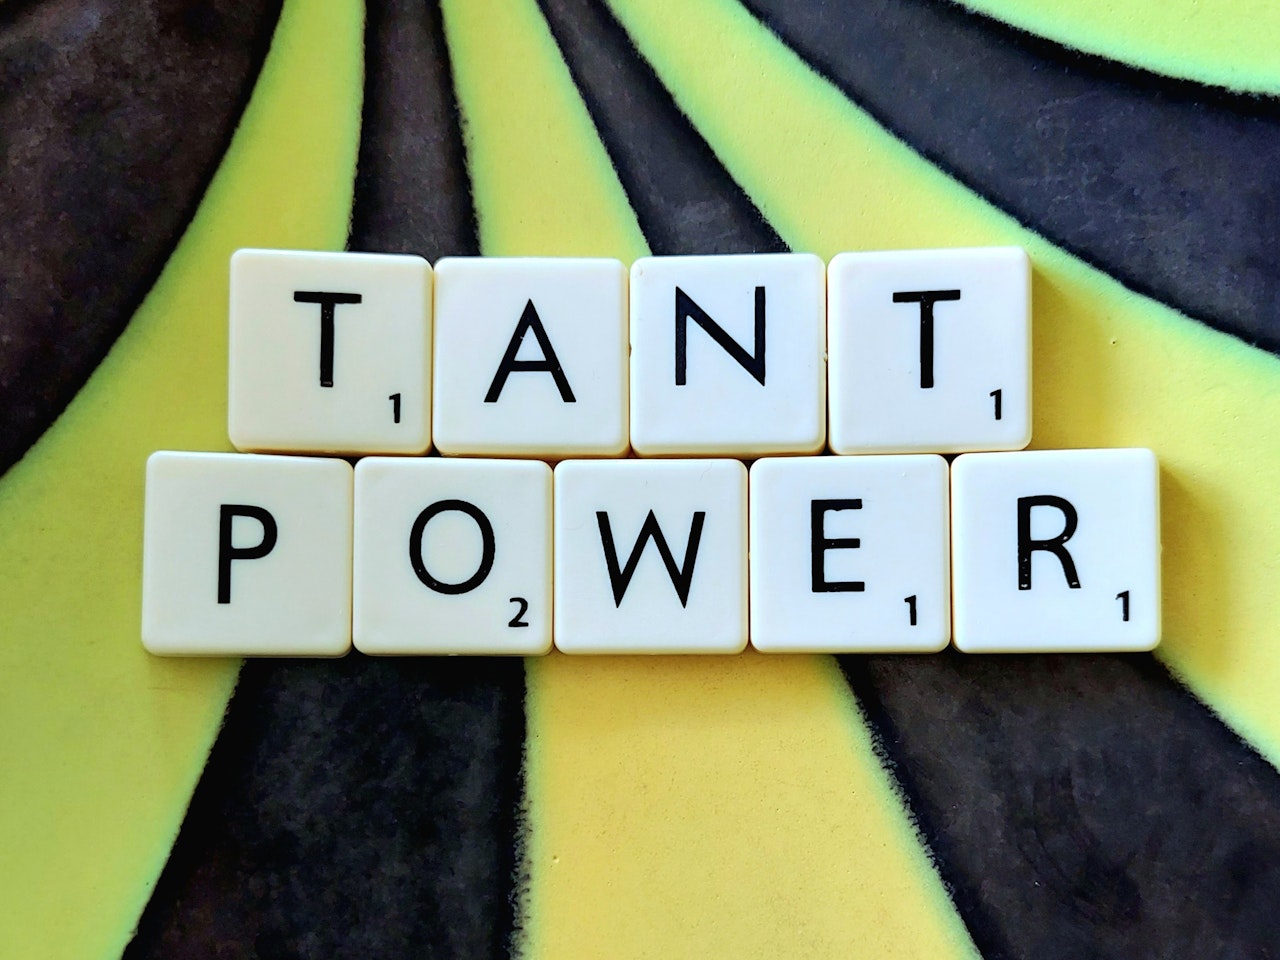 Tant power (A6)